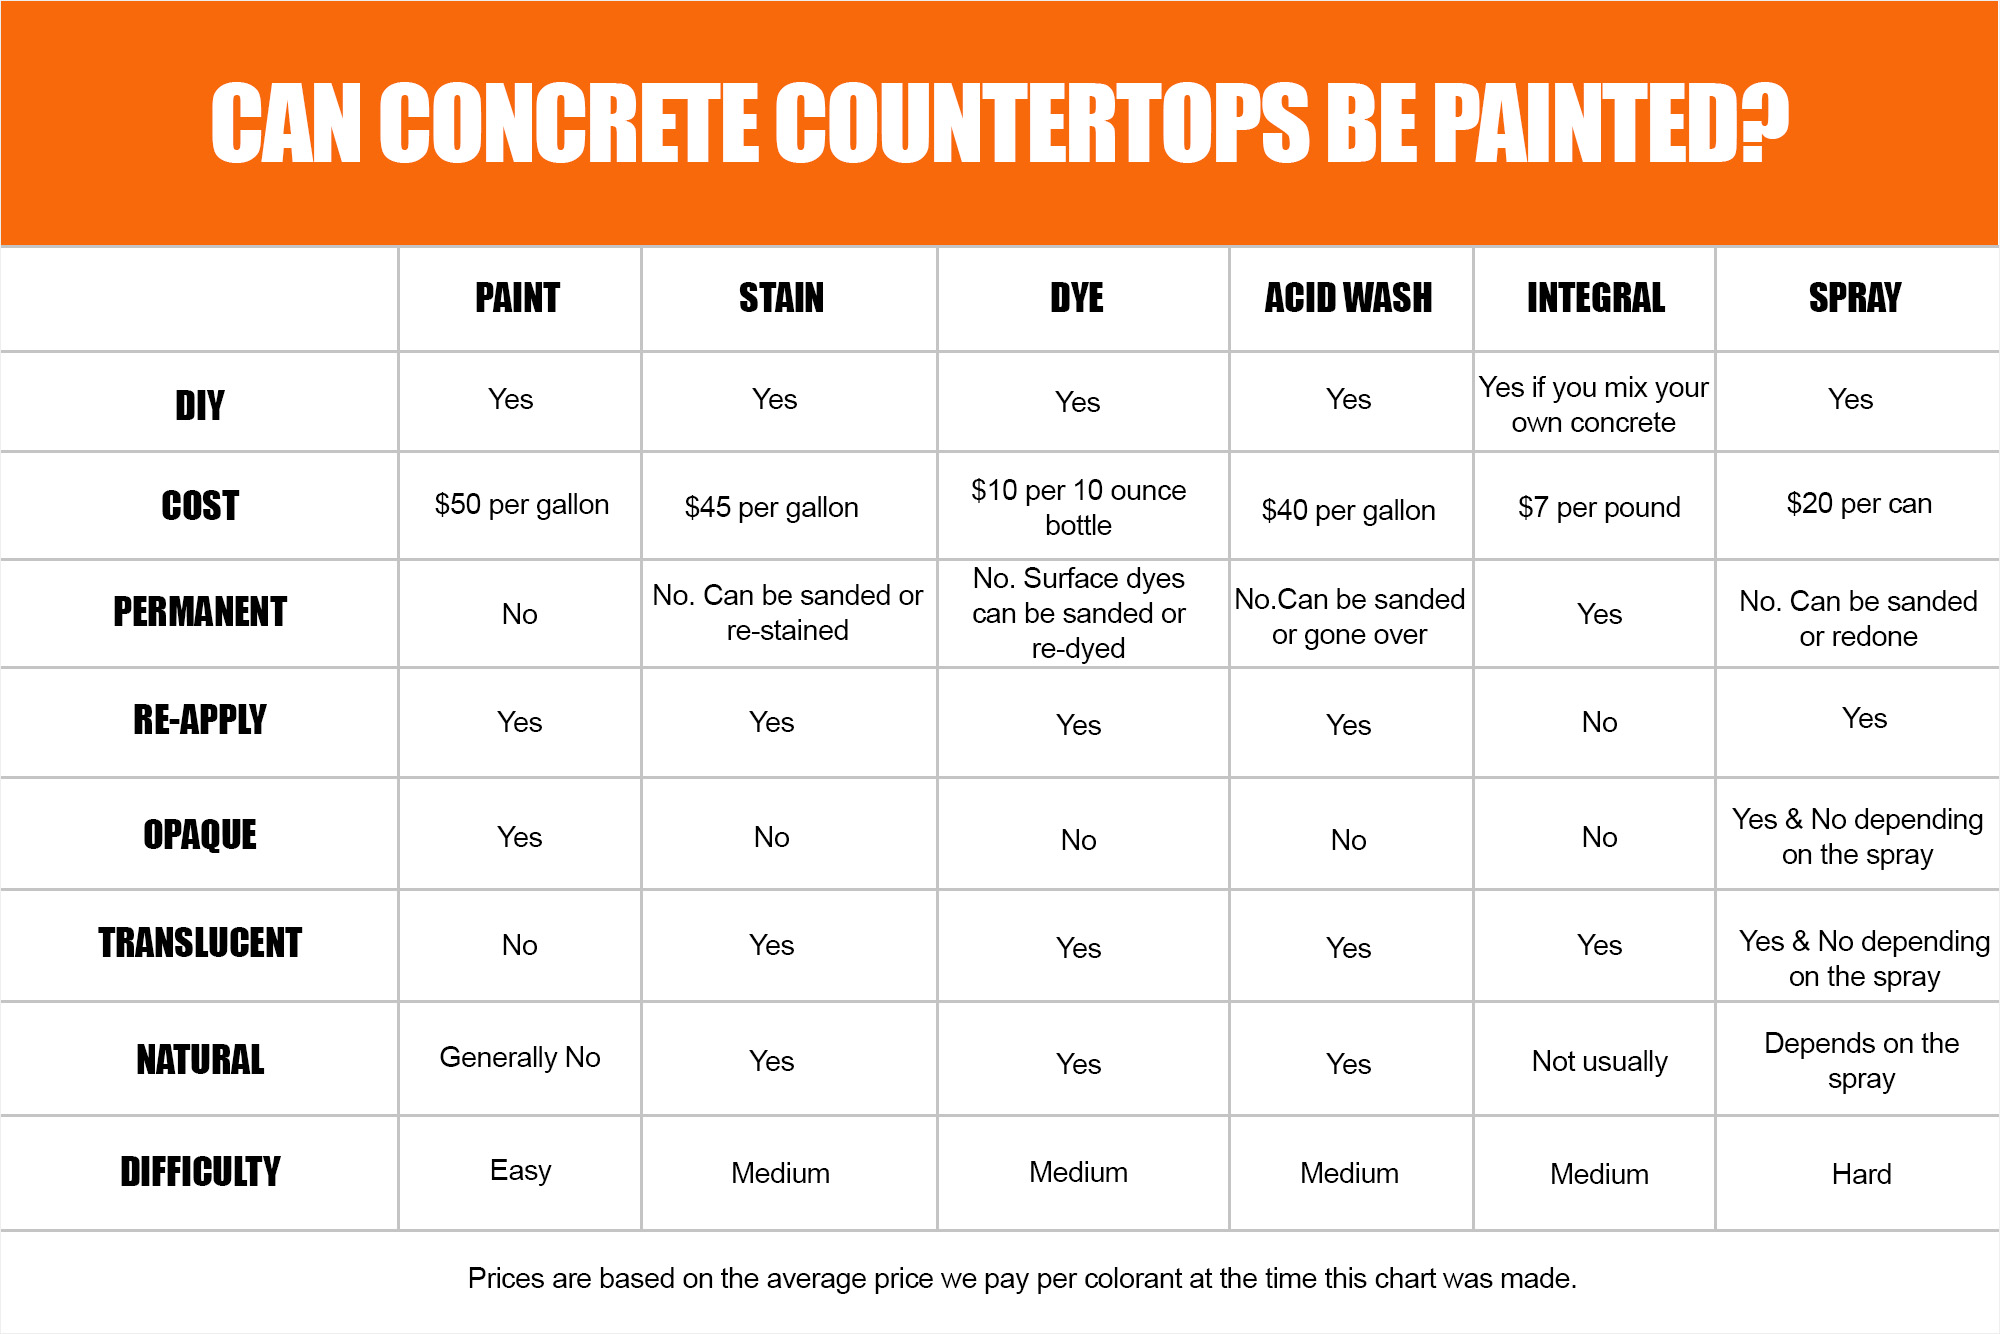 Can Concrete Countertops Be Painting infographic chart